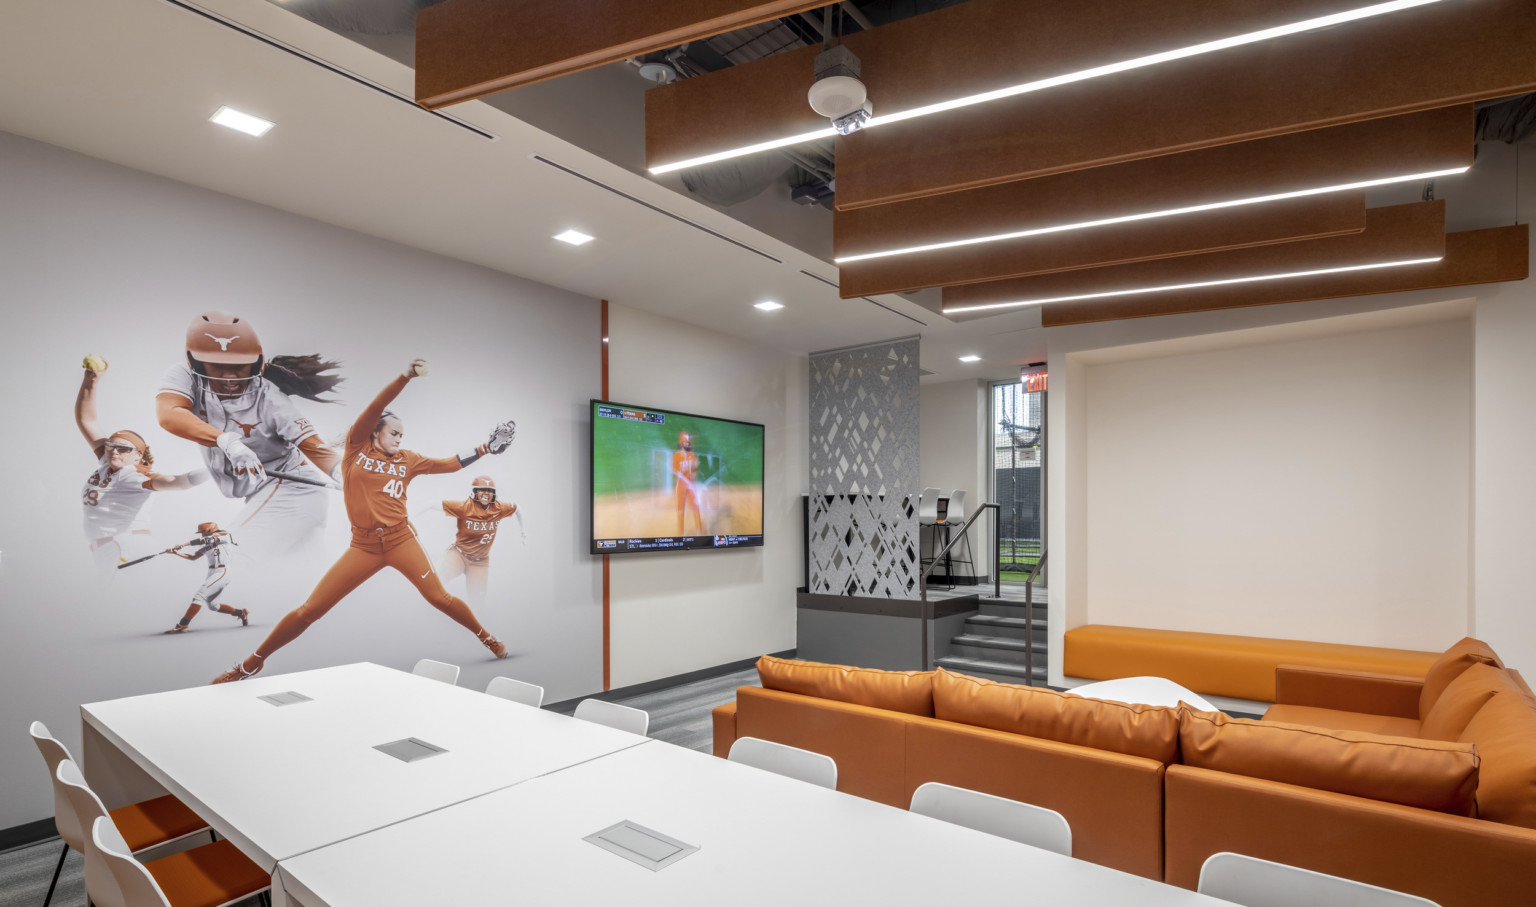 University of Texas Softball Development Facility interior. Softball mural on wall next to screen in front of orange couch